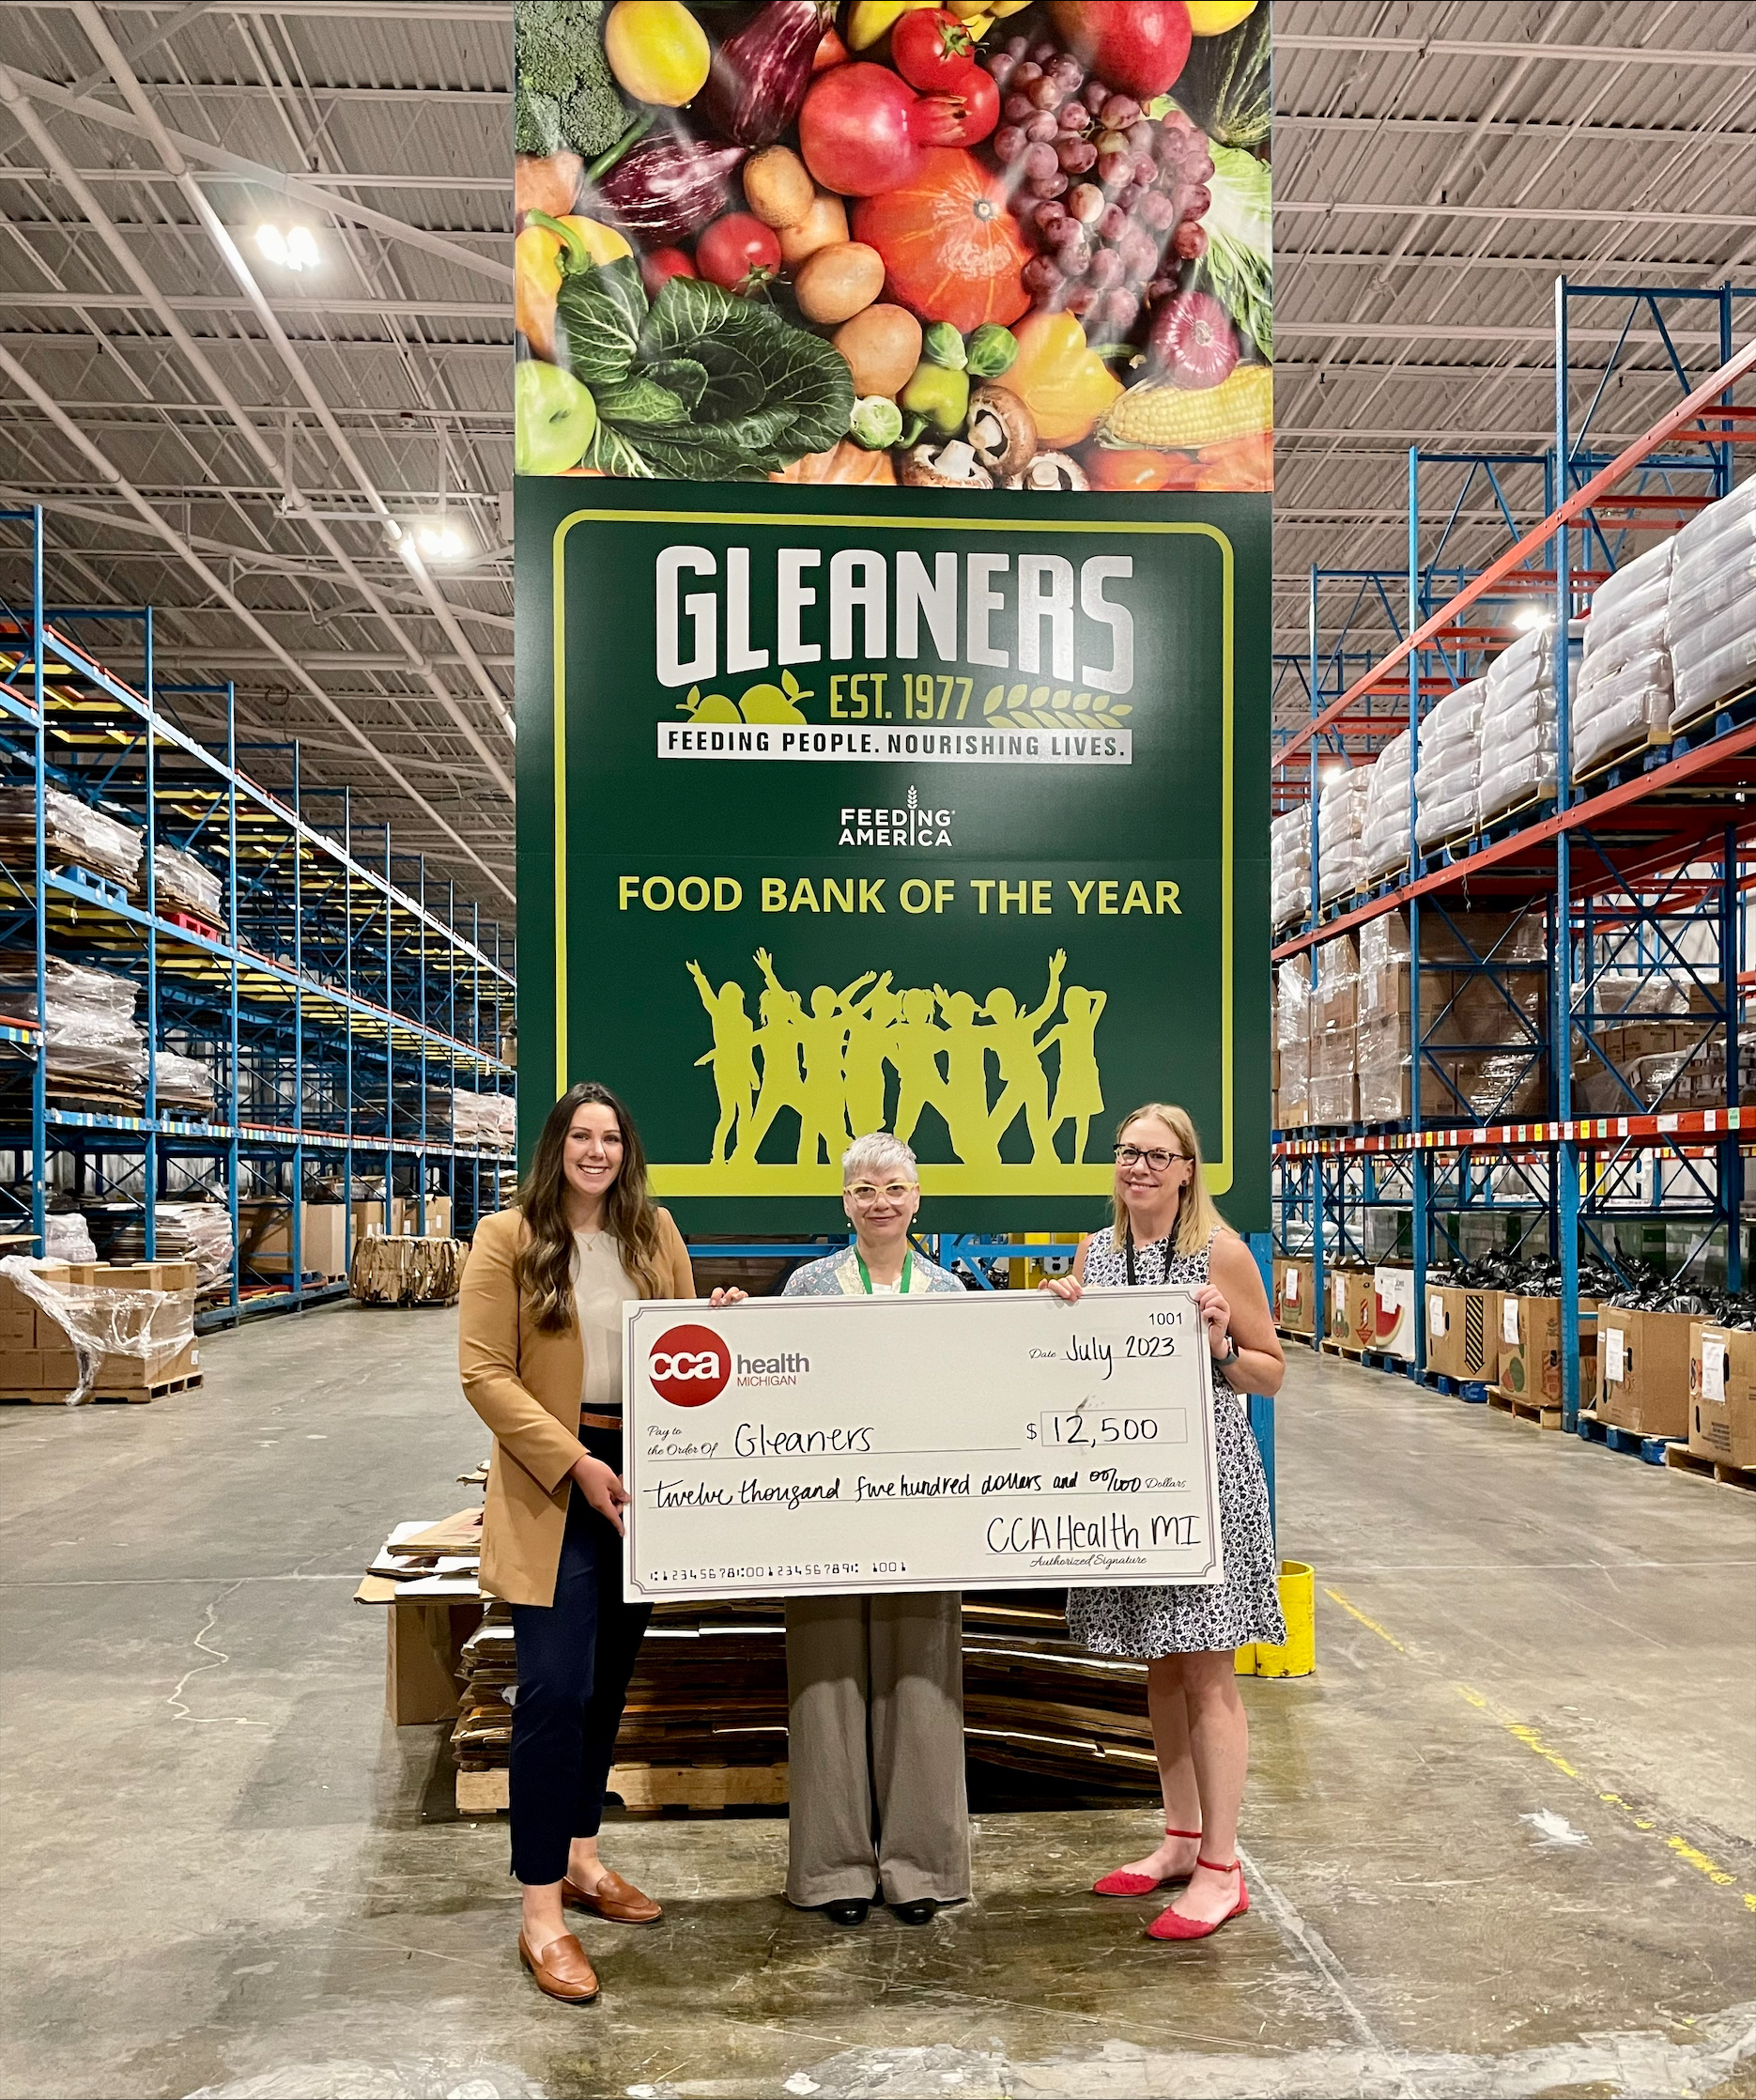 Presentation of donation to Gleaners Community Food Bank